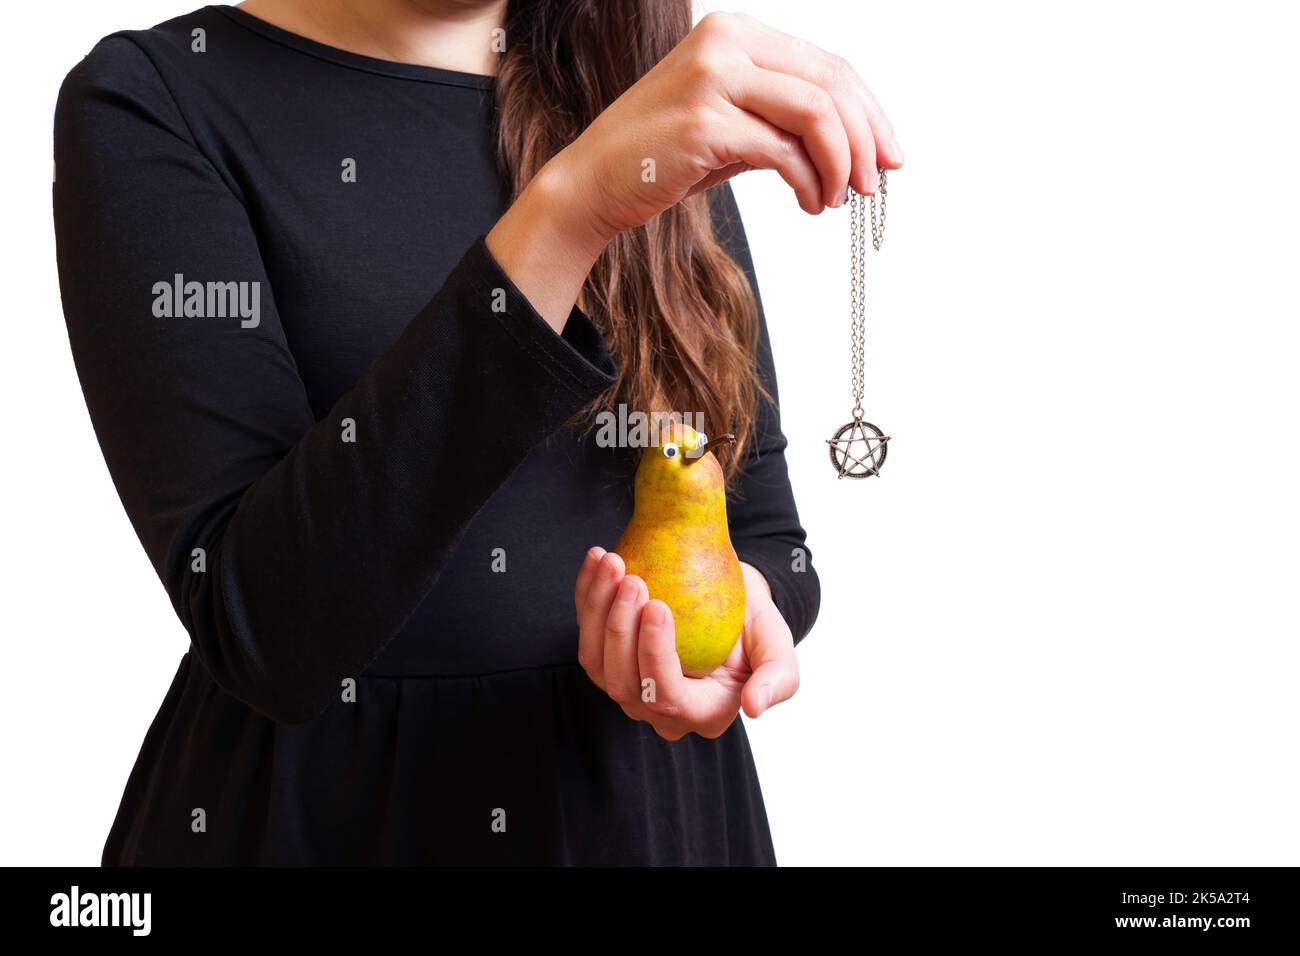 Young witch in black holds an anthropomorphic pear character and pentagram necklace in hands making a spell. Creative reincarnation ritual concept. Stock Photo